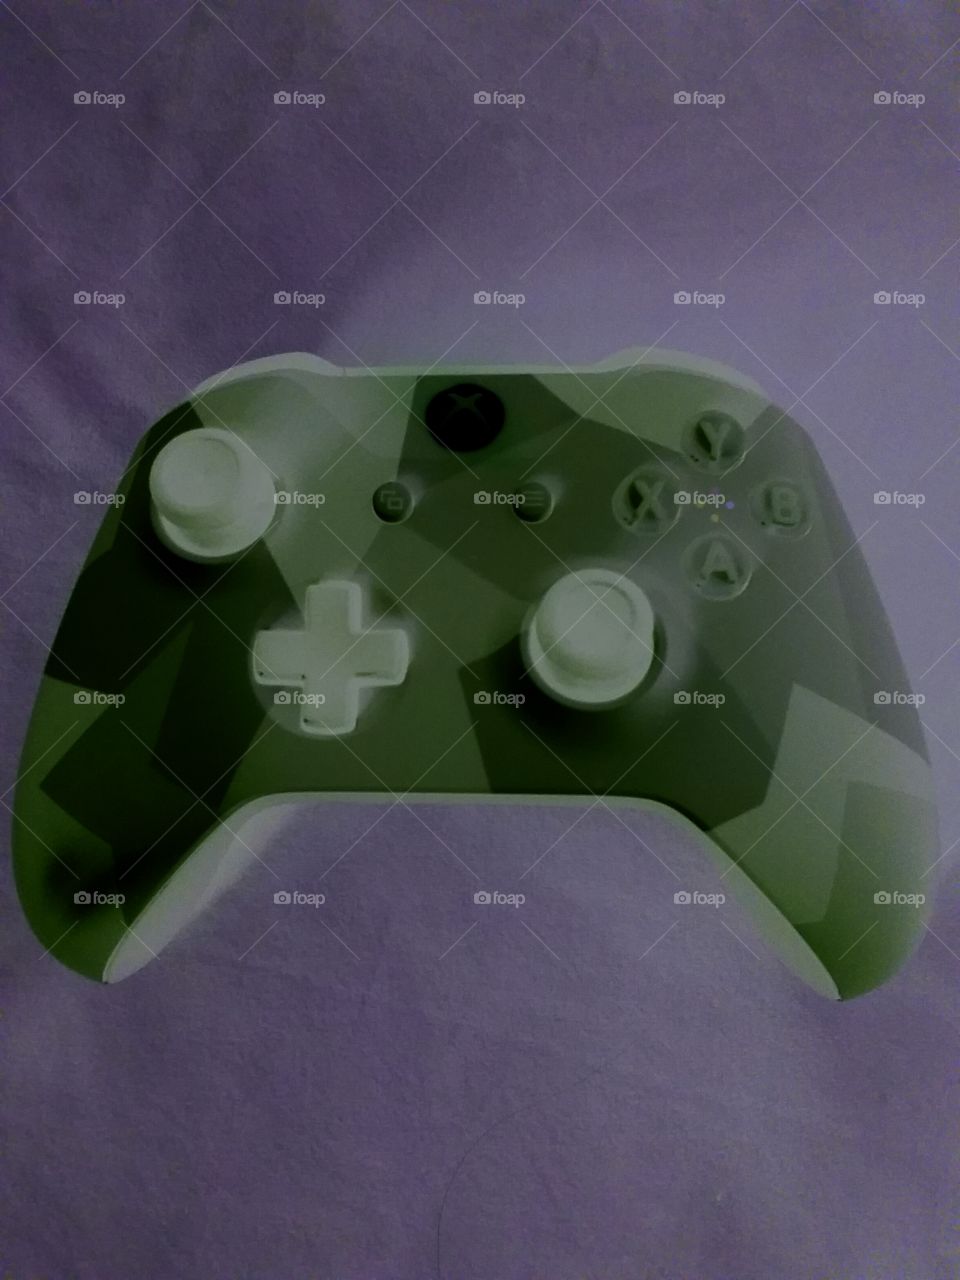 Xbox Controller with a twist.